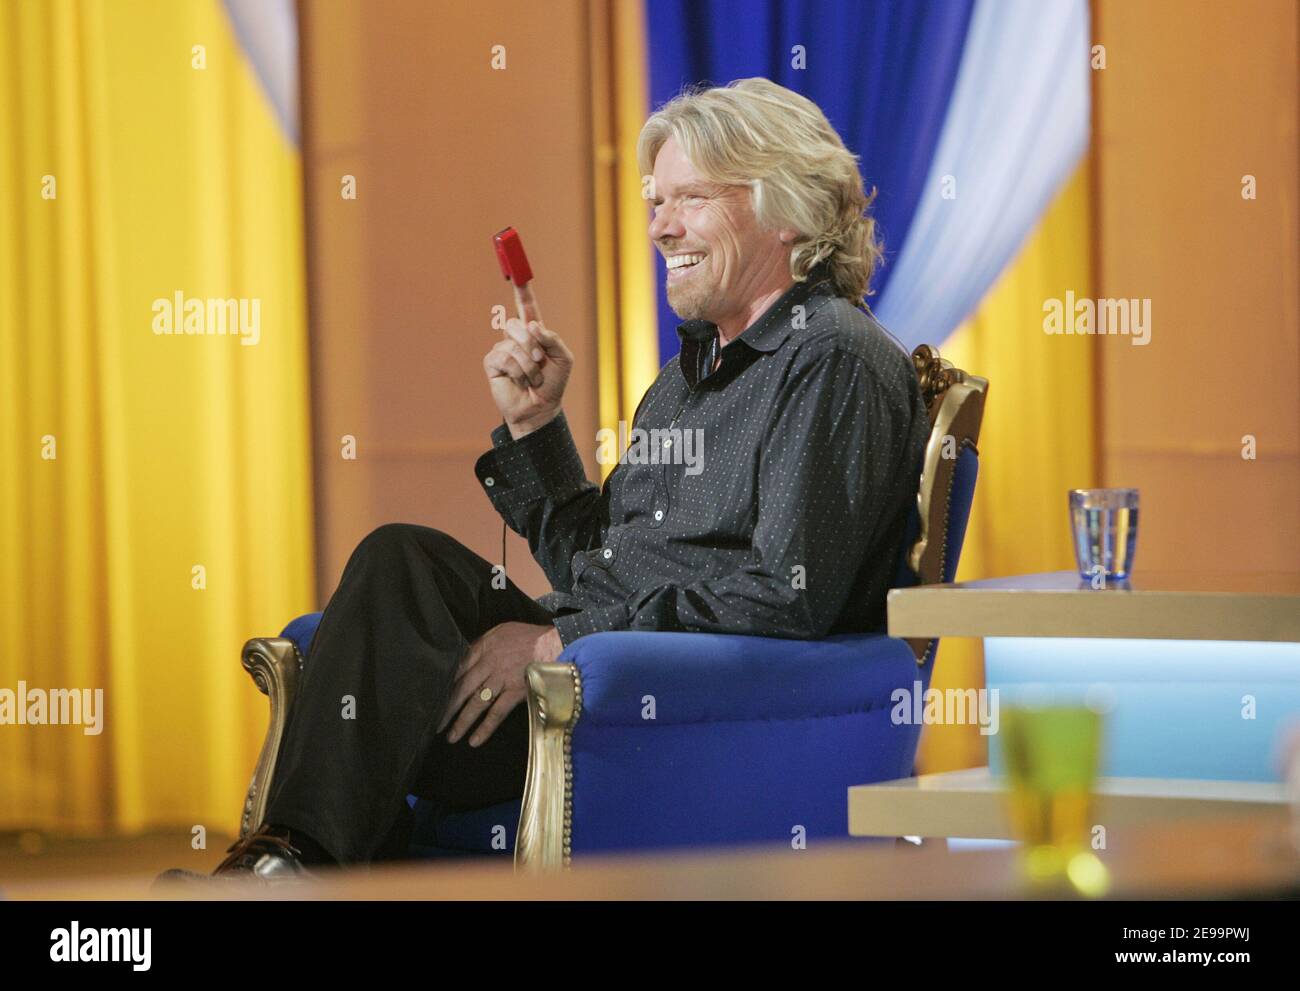 Sir Richard Branson attends Sebastien Cauet's TV Show 'La Methode Cauet', a program with a very young audience, during his one day visit in Paris to promote the launch of his phone service 'Virgin Mobile' on April 3, 2006. Photo by Thierry Boccon-Gibod/ABACAPRESS.COM Stock Photo